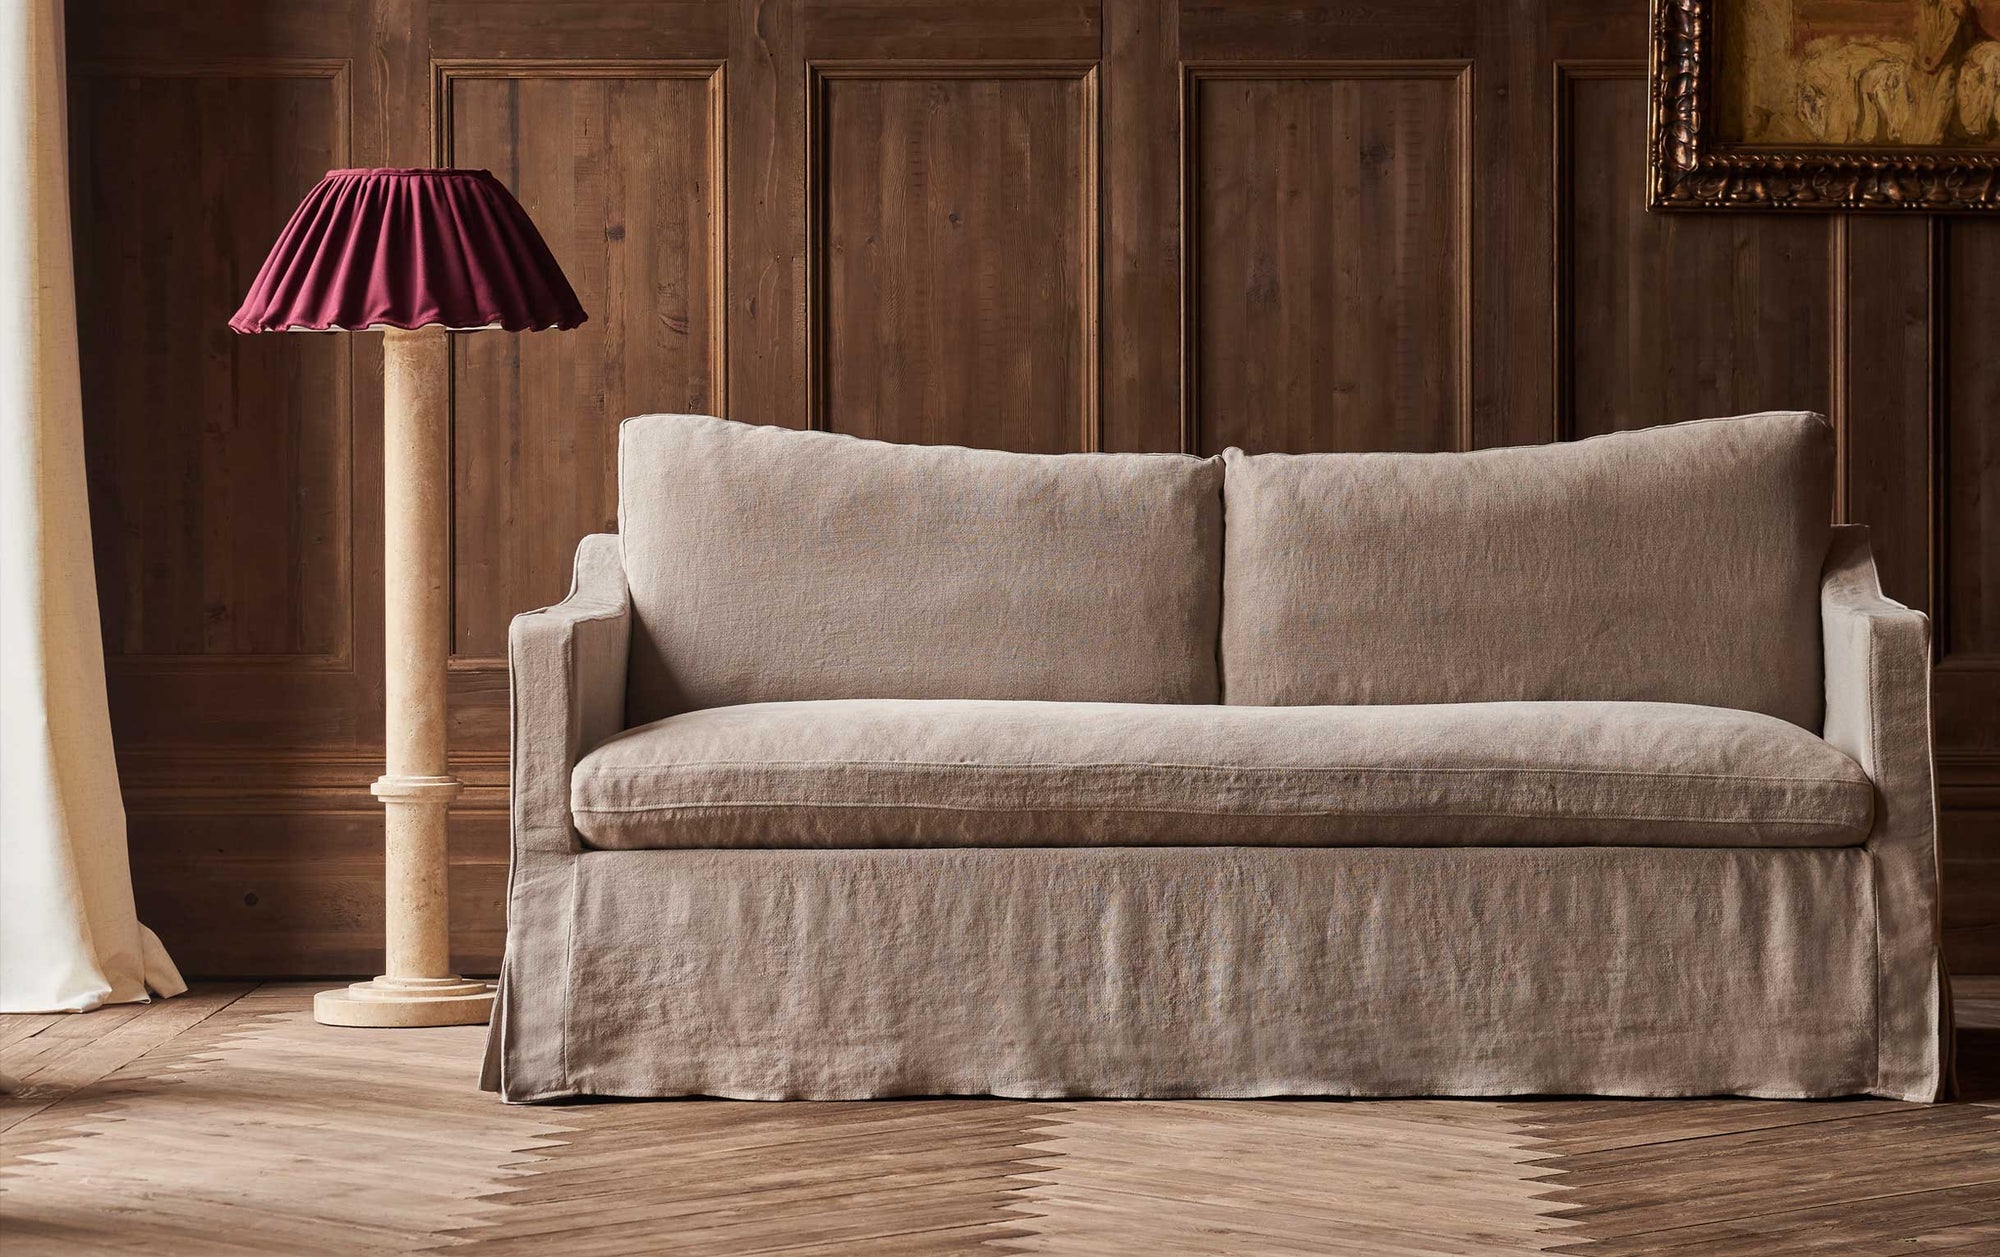 Amelia 72" Sofa in Oat Flour, a medium taupe Light Weight Linen, placed in a naturally lit, wood paneled room, next to a floor lamp